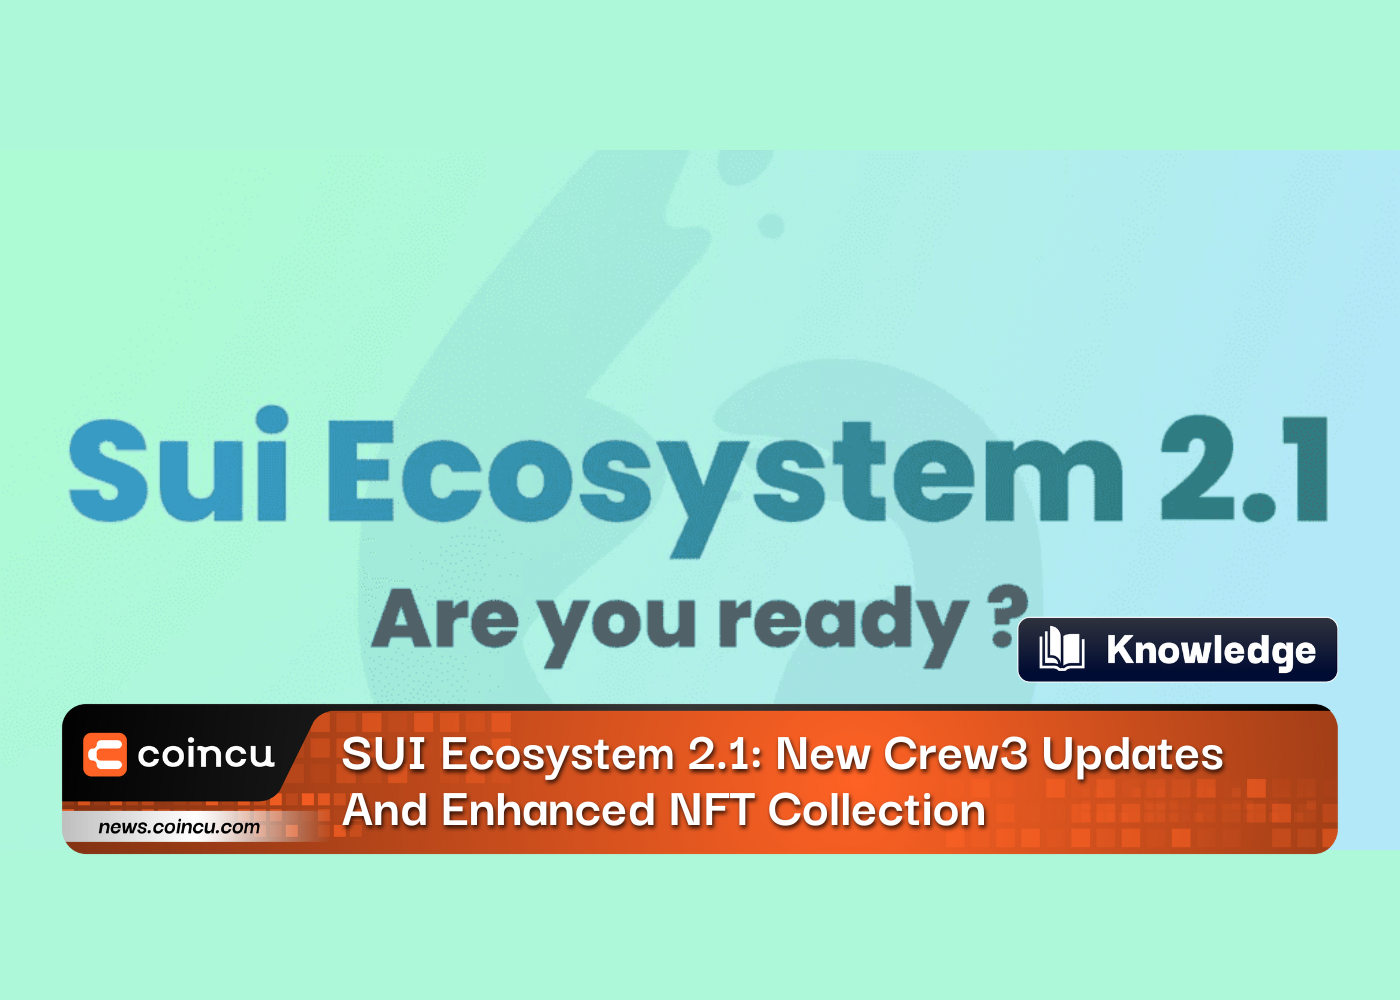 SUI Ecosystem 2.1: New Crew3 Updates And Enhanced NFT Collection